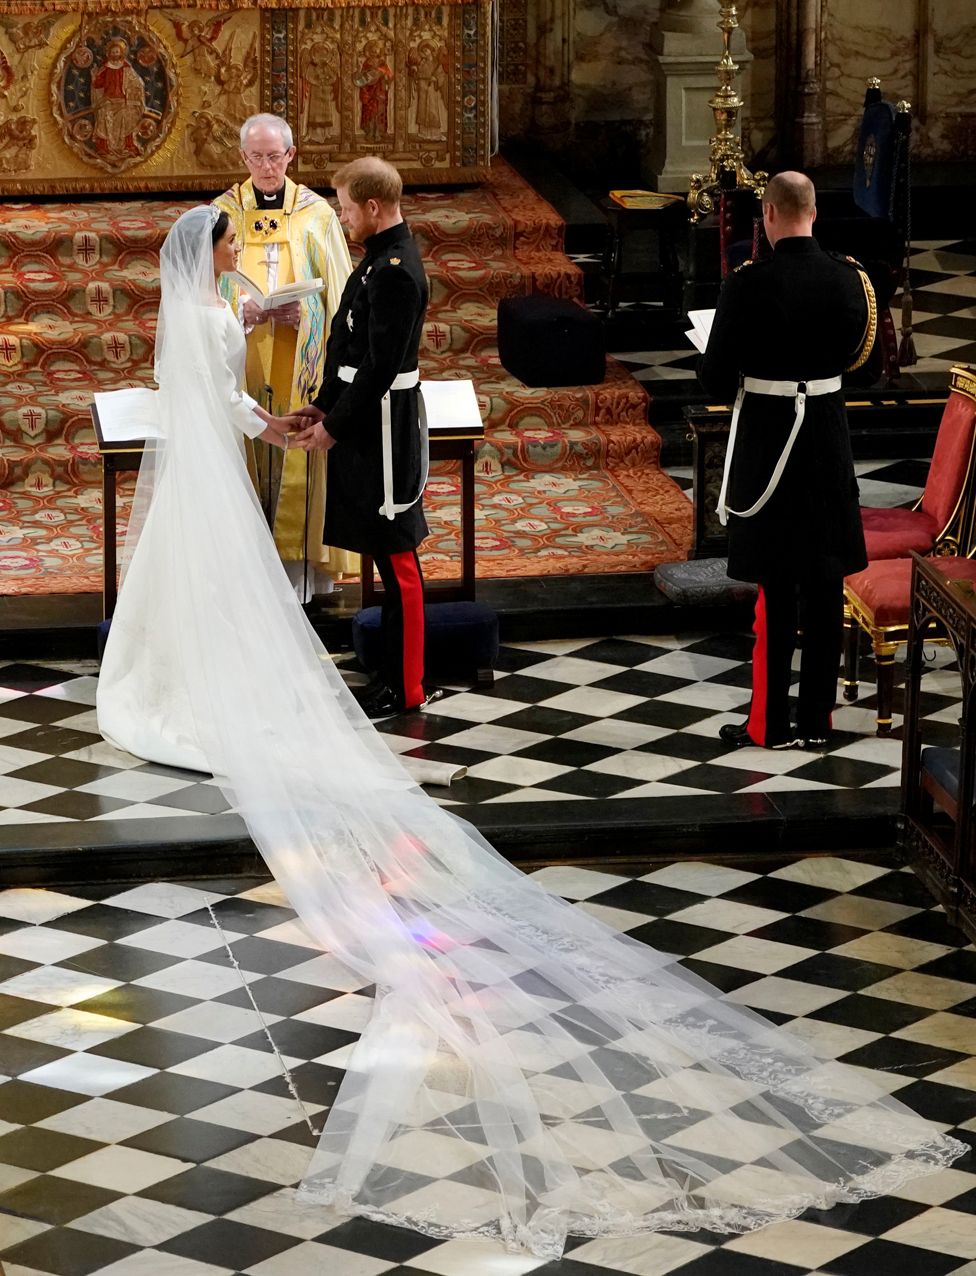 Meghan Markle in St George"s Chapel at Windsor Castle during her wedding to Prince Harry